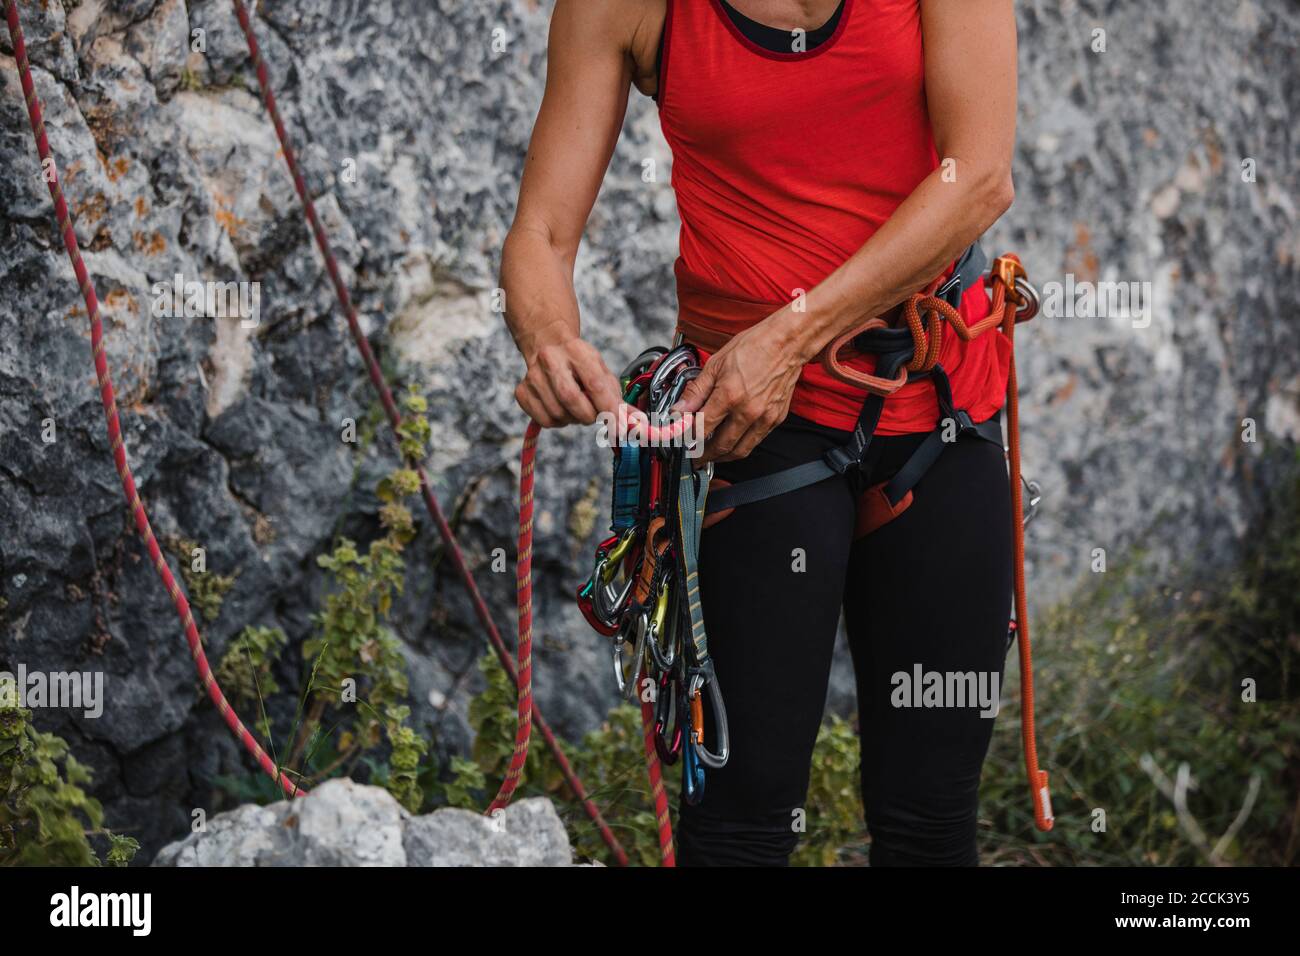 Woman adjusting ropes while preparing for rock climbing Stock Photo